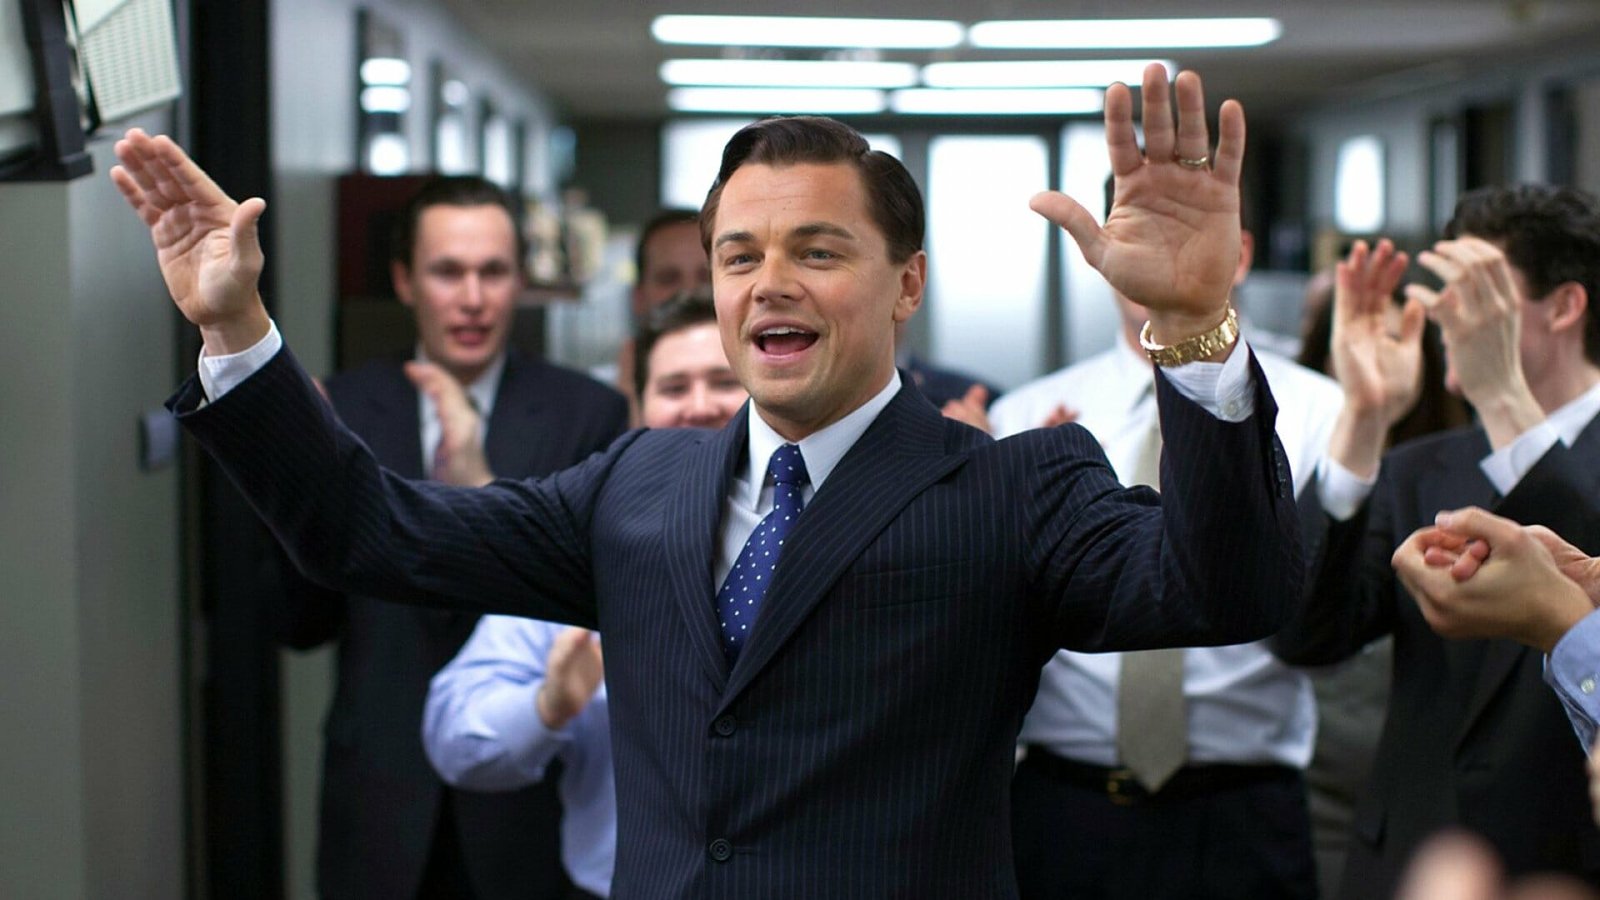 Movies about rich people: The Wolf of Wall Street